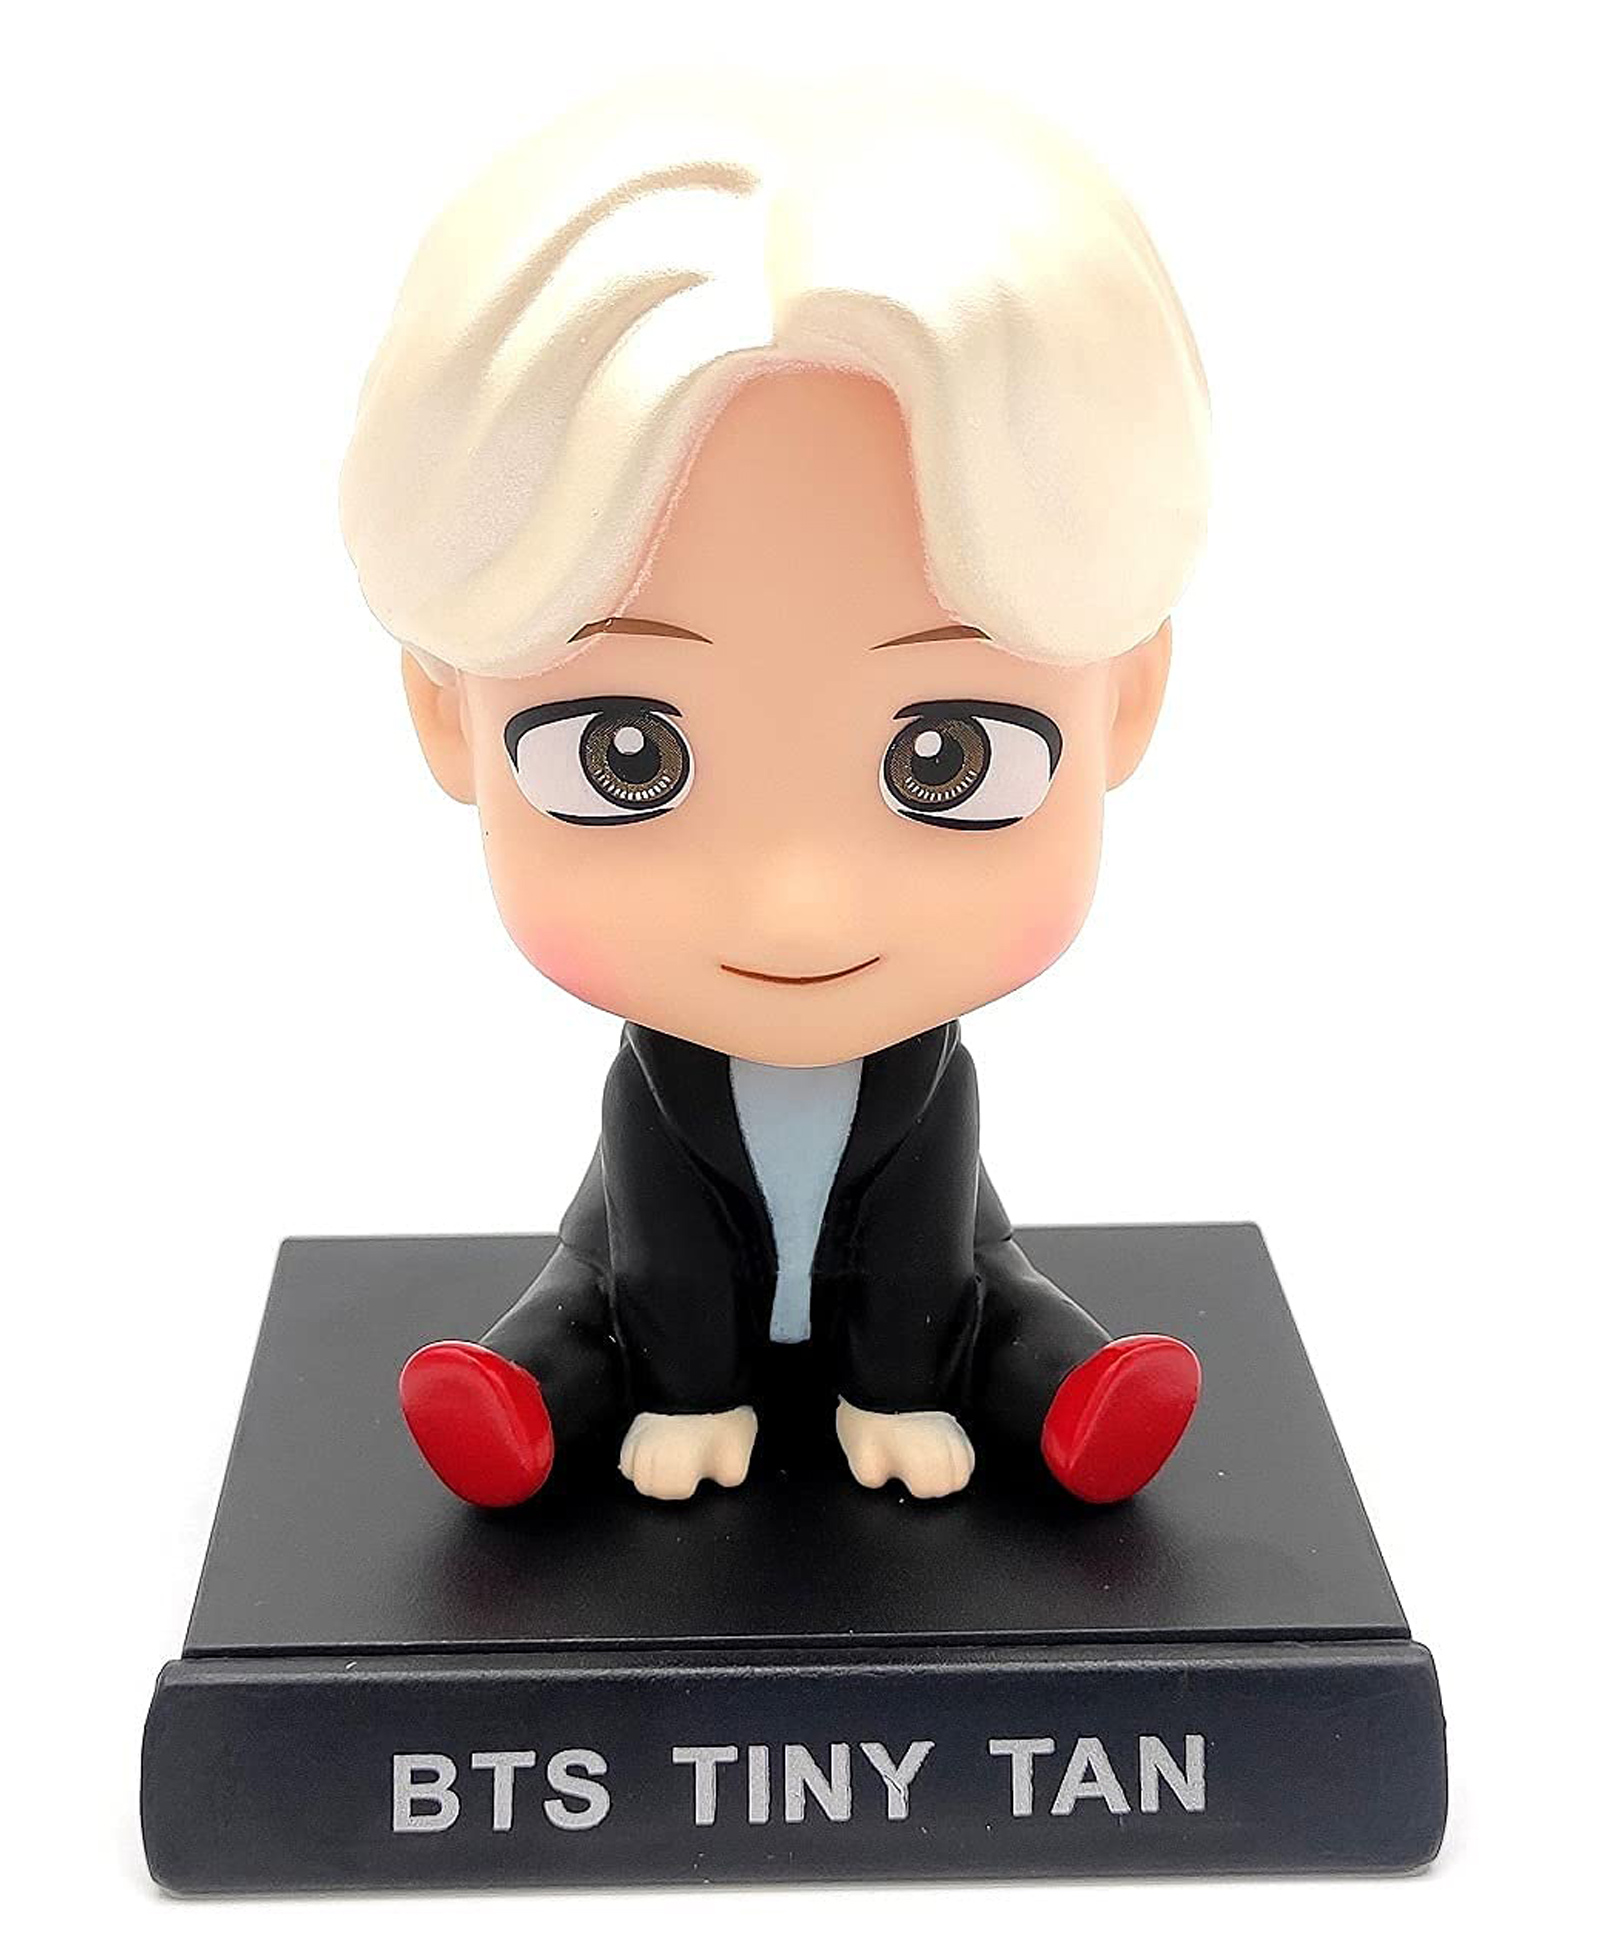 AUGEN Super Hero BTS-Jin Action Figure Limited Edition Plastic Bobblehead  with Mobile Holder - Height 15 cm Online India, Buy Figures & Playsets for  (3-15 Years) at  - 11401632